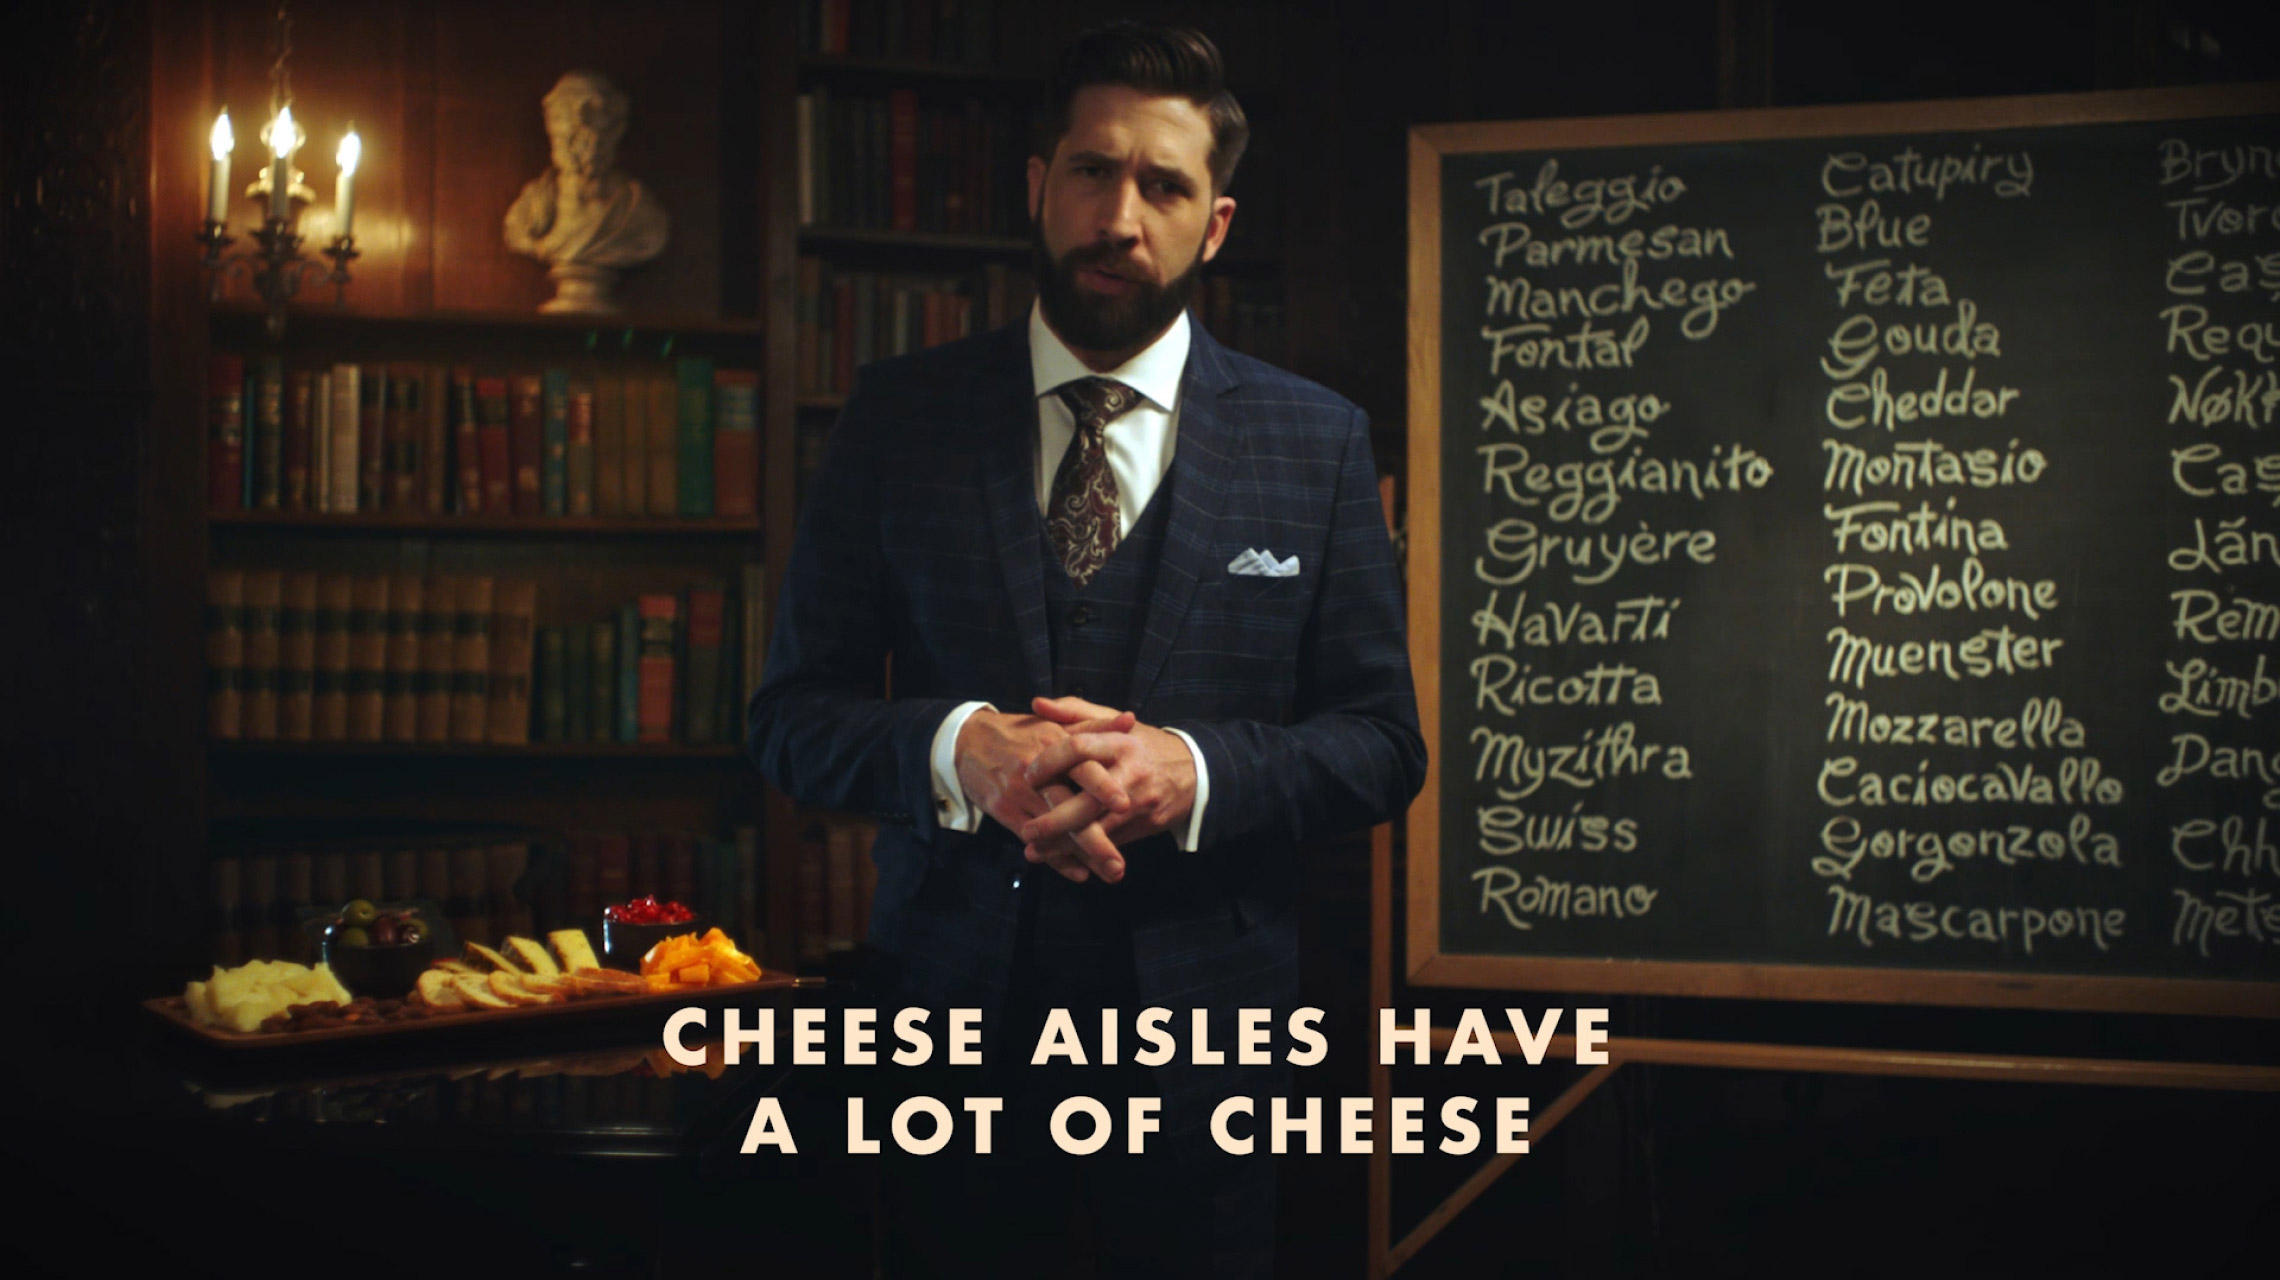 Click to play video showing how to properly serve cheese.